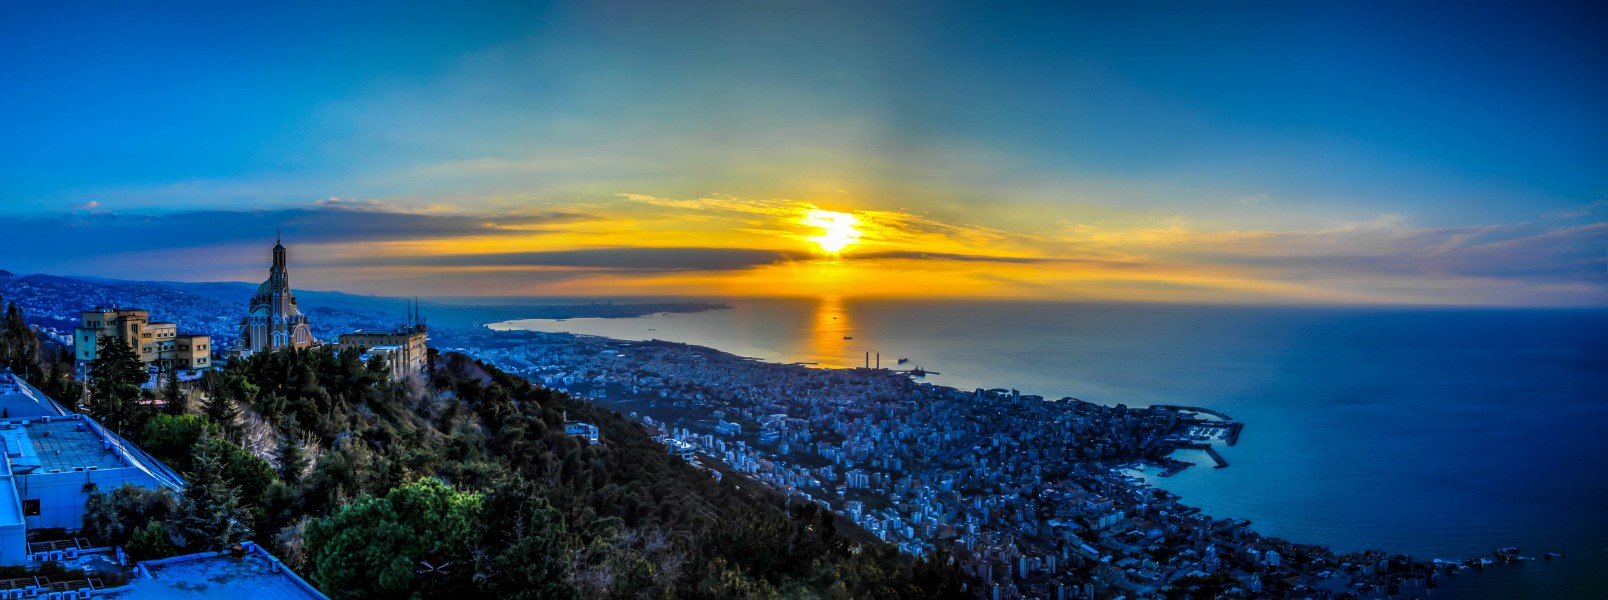 Majestic View From Harissa